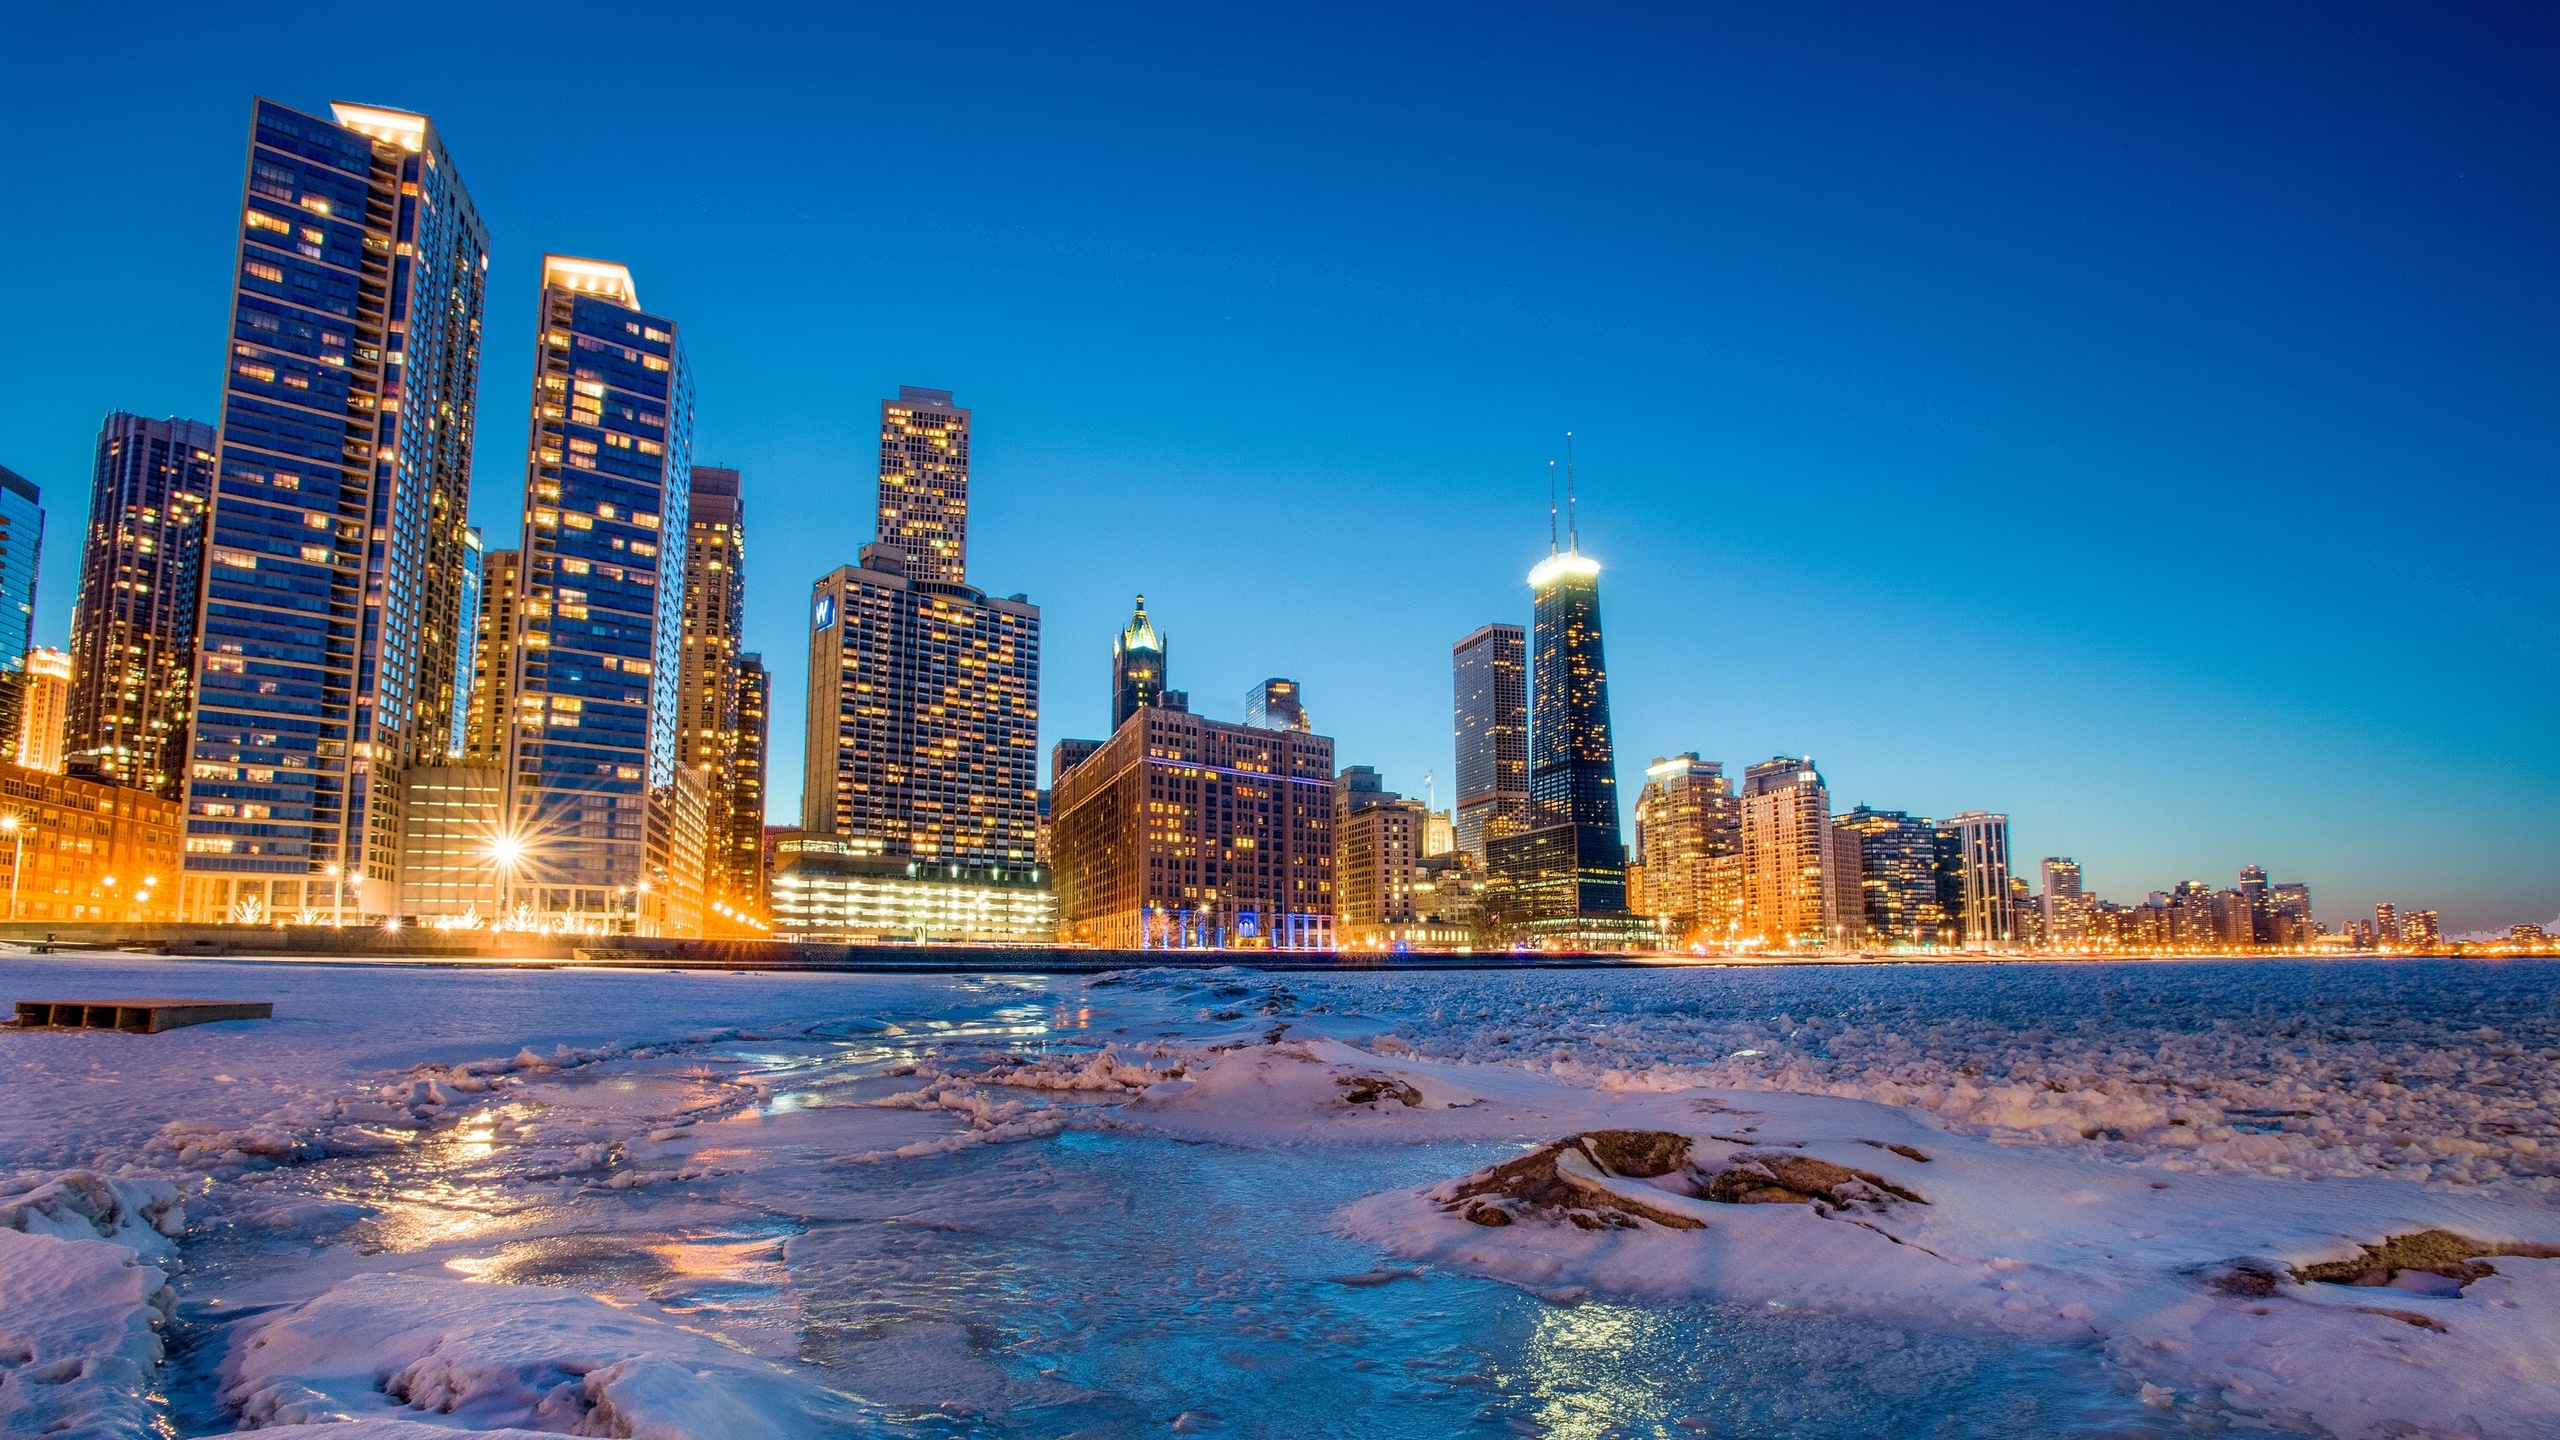 chicago, Winter, Ice, Skyscrapers, Bay, City, Nightlife, Window, Lakes, Beaches Wallpaper